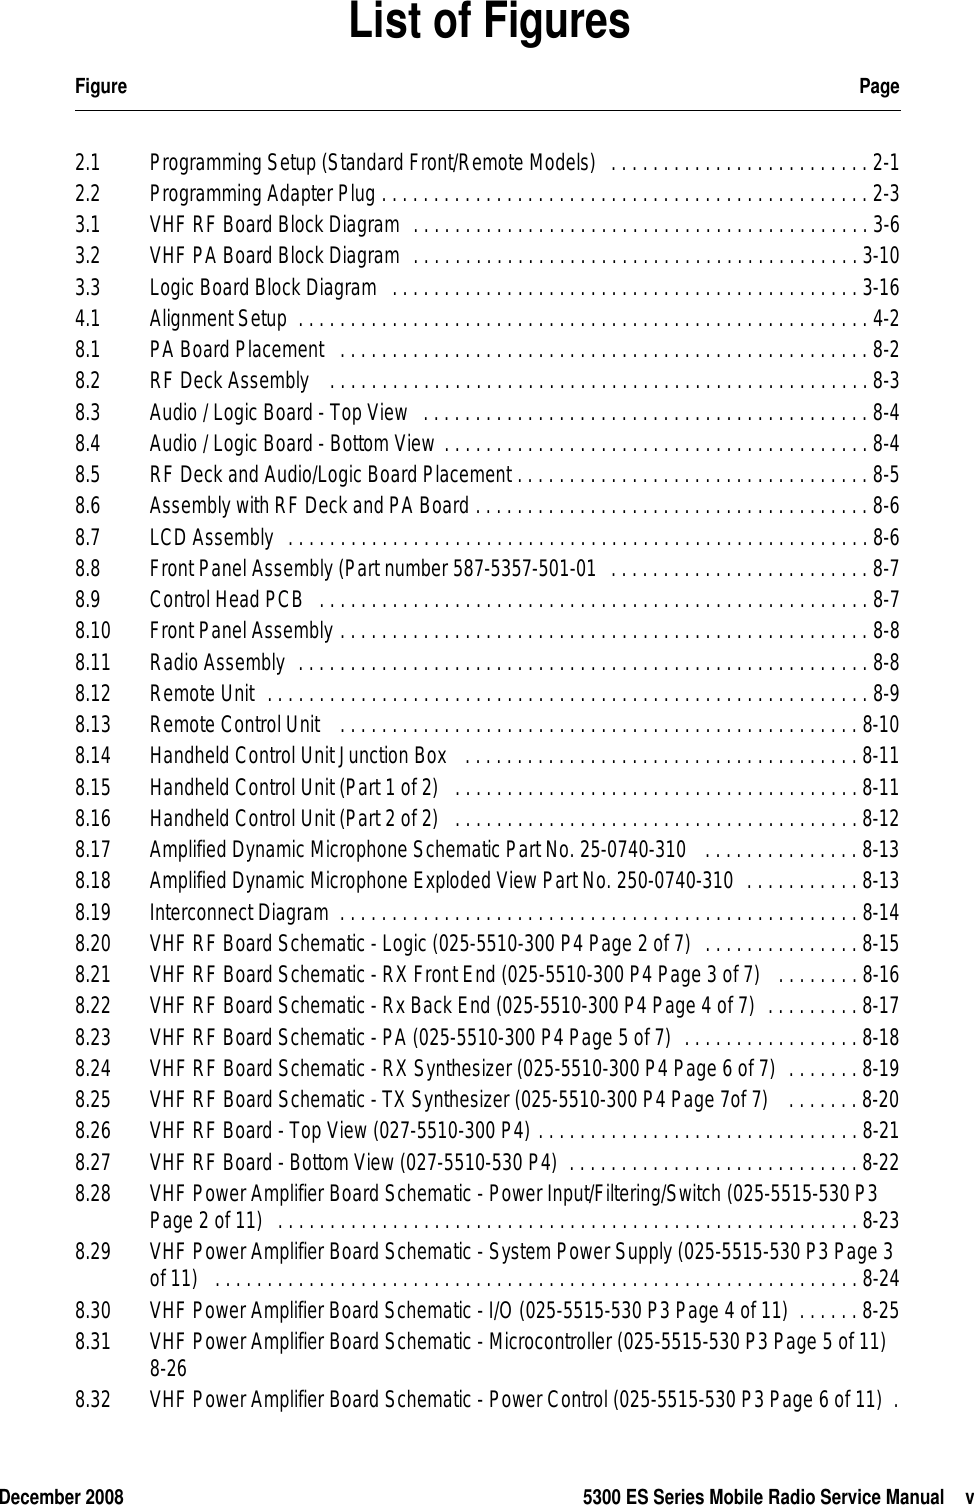 December 2008 5300 ES Series Mobile Radio Service Manual vList of FiguresFigure Page2.1  Programming Setup (Standard Front/Remote Models)   . . . . . . . . . . . . . . . . . . . . . . . . . 2-12.2  Programming Adapter Plug . . . . . . . . . . . . . . . . . . . . . . . . . . . . . . . . . . . . . . . . . . . . . . . 2-33.1  VHF RF Board Block Diagram  . . . . . . . . . . . . . . . . . . . . . . . . . . . . . . . . . . . . . . . . . . . . 3-63.2  VHF PA Board Block Diagram  . . . . . . . . . . . . . . . . . . . . . . . . . . . . . . . . . . . . . . . . . . . 3-103.3  Logic Board Block Diagram   . . . . . . . . . . . . . . . . . . . . . . . . . . . . . . . . . . . . . . . . . . . . . 3-164.1  Alignment Setup  . . . . . . . . . . . . . . . . . . . . . . . . . . . . . . . . . . . . . . . . . . . . . . . . . . . . . . . 4-28.1  PA Board Placement   . . . . . . . . . . . . . . . . . . . . . . . . . . . . . . . . . . . . . . . . . . . . . . . . . . . 8-28.2  RF Deck Assembly    . . . . . . . . . . . . . . . . . . . . . . . . . . . . . . . . . . . . . . . . . . . . . . . . . . . . 8-38.3  Audio / Logic Board - Top View  . . . . . . . . . . . . . . . . . . . . . . . . . . . . . . . . . . . . . . . . . . . 8-48.4  Audio / Logic Board - Bottom View . . . . . . . . . . . . . . . . . . . . . . . . . . . . . . . . . . . . . . . . . 8-48.5  RF Deck and Audio/Logic Board Placement . . . . . . . . . . . . . . . . . . . . . . . . . . . . . . . . . . 8-58.6  Assembly with RF Deck and PA Board . . . . . . . . . . . . . . . . . . . . . . . . . . . . . . . . . . . . . . 8-68.7  LCD Assembly  . . . . . . . . . . . . . . . . . . . . . . . . . . . . . . . . . . . . . . . . . . . . . . . . . . . . . . . . 8-68.8  Front Panel Assembly (Part number 587-5357-501-01  . . . . . . . . . . . . . . . . . . . . . . . . . 8-78.9  Control Head PCB   . . . . . . . . . . . . . . . . . . . . . . . . . . . . . . . . . . . . . . . . . . . . . . . . . . . . . 8-78.10  Front Panel Assembly . . . . . . . . . . . . . . . . . . . . . . . . . . . . . . . . . . . . . . . . . . . . . . . . . . . 8-88.11  Radio Assembly  . . . . . . . . . . . . . . . . . . . . . . . . . . . . . . . . . . . . . . . . . . . . . . . . . . . . . . . 8-88.12  Remote Unit  . . . . . . . . . . . . . . . . . . . . . . . . . . . . . . . . . . . . . . . . . . . . . . . . . . . . . . . . . . 8-98.13  Remote Control Unit   . . . . . . . . . . . . . . . . . . . . . . . . . . . . . . . . . . . . . . . . . . . . . . . . . . 8-108.14  Handheld Control Unit Junction Box   . . . . . . . . . . . . . . . . . . . . . . . . . . . . . . . . . . . . . . 8-118.15  Handheld Control Unit (Part 1 of 2)   . . . . . . . . . . . . . . . . . . . . . . . . . . . . . . . . . . . . . . . 8-118.16  Handheld Control Unit (Part 2 of 2)   . . . . . . . . . . . . . . . . . . . . . . . . . . . . . . . . . . . . . . . 8-128.17  Amplified Dynamic Microphone Schematic Part No. 25-0740-310   . . . . . . . . . . . . . . . 8-138.18  Amplified Dynamic Microphone Exploded View Part No. 250-0740-310  . . . . . . . . . . . 8-138.19  Interconnect Diagram  . . . . . . . . . . . . . . . . . . . . . . . . . . . . . . . . . . . . . . . . . . . . . . . . . . 8-148.20  VHF RF Board Schematic - Logic (025-5510-300 P4 Page 2 of 7)  . . . . . . . . . . . . . . . 8-158.21  VHF RF Board Schematic - RX Front End (025-5510-300 P4 Page 3 of 7)   . . . . . . . . 8-168.22  VHF RF Board Schematic - Rx Back End (025-5510-300 P4 Page 4 of 7)  . . . . . . . . . 8-178.23  VHF RF Board Schematic - PA (025-5510-300 P4 Page 5 of 7)  . . . . . . . . . . . . . . . . . 8-188.24  VHF RF Board Schematic - RX Synthesizer (025-5510-300 P4 Page 6 of 7)  . . . . . . . 8-198.25  VHF RF Board Schematic - TX Synthesizer (025-5510-300 P4 Page 7of 7)    . . . . . . . 8-208.26  VHF RF Board - Top View (027-5510-300 P4) . . . . . . . . . . . . . . . . . . . . . . . . . . . . . . . 8-218.27  VHF RF Board - Bottom View (027-5510-530 P4)  . . . . . . . . . . . . . . . . . . . . . . . . . . . . 8-228.28  VHF Power Amplifier Board Schematic - Power Input/Filtering/Switch (025-5515-530 P3 Page 2 of 11)  . . . . . . . . . . . . . . . . . . . . . . . . . . . . . . . . . . . . . . . . . . . . . . . . . . . . . . . . 8-238.29  VHF Power Amplifier Board Schematic - System Power Supply (025-5515-530 P3 Page 3 of 11)   . . . . . . . . . . . . . . . . . . . . . . . . . . . . . . . . . . . . . . . . . . . . . . . . . . . . . . . . . . . . . . 8-248.30  VHF Power Amplifier Board Schematic - I/O (025-5515-530 P3 Page 4 of 11)  . . . . . . 8-258.31  VHF Power Amplifier Board Schematic - Microcontroller (025-5515-530 P3 Page 5 of 11)  8-268.32  VHF Power Amplifier Board Schematic - Power Control (025-5515-530 P3 Page 6 of 11)  .